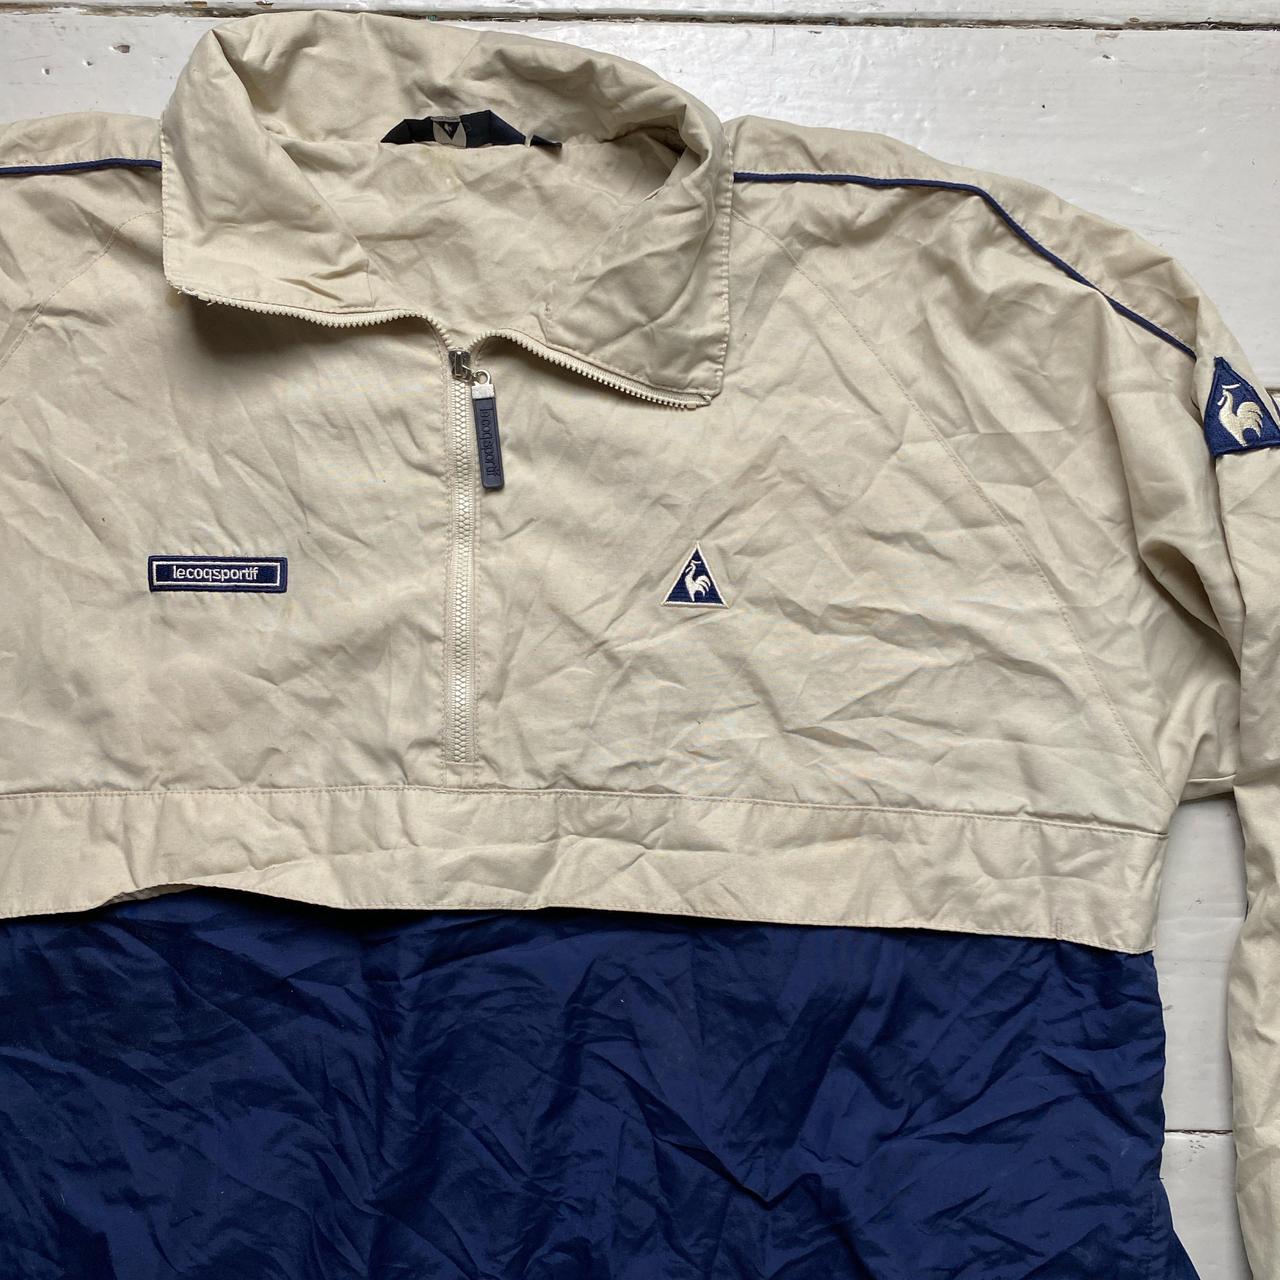 Le Coq Sportif Cream Beige and Navy Quarter Zip Shell Tracksuit Jacket